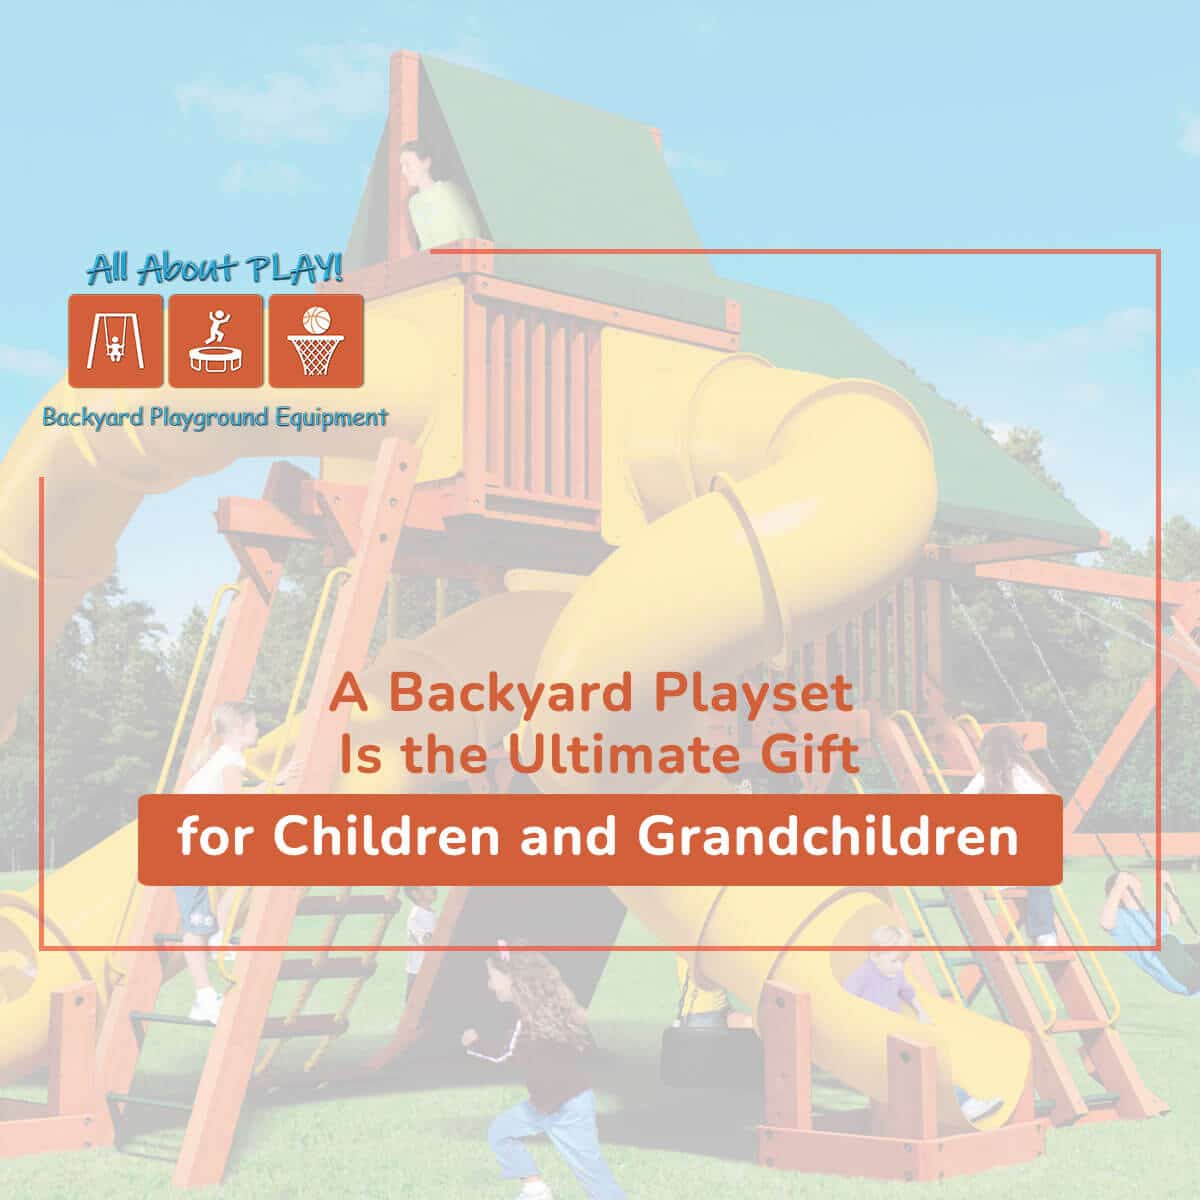 A Backyard Playset Is the Ultimate Gift for Children and Grandchildren